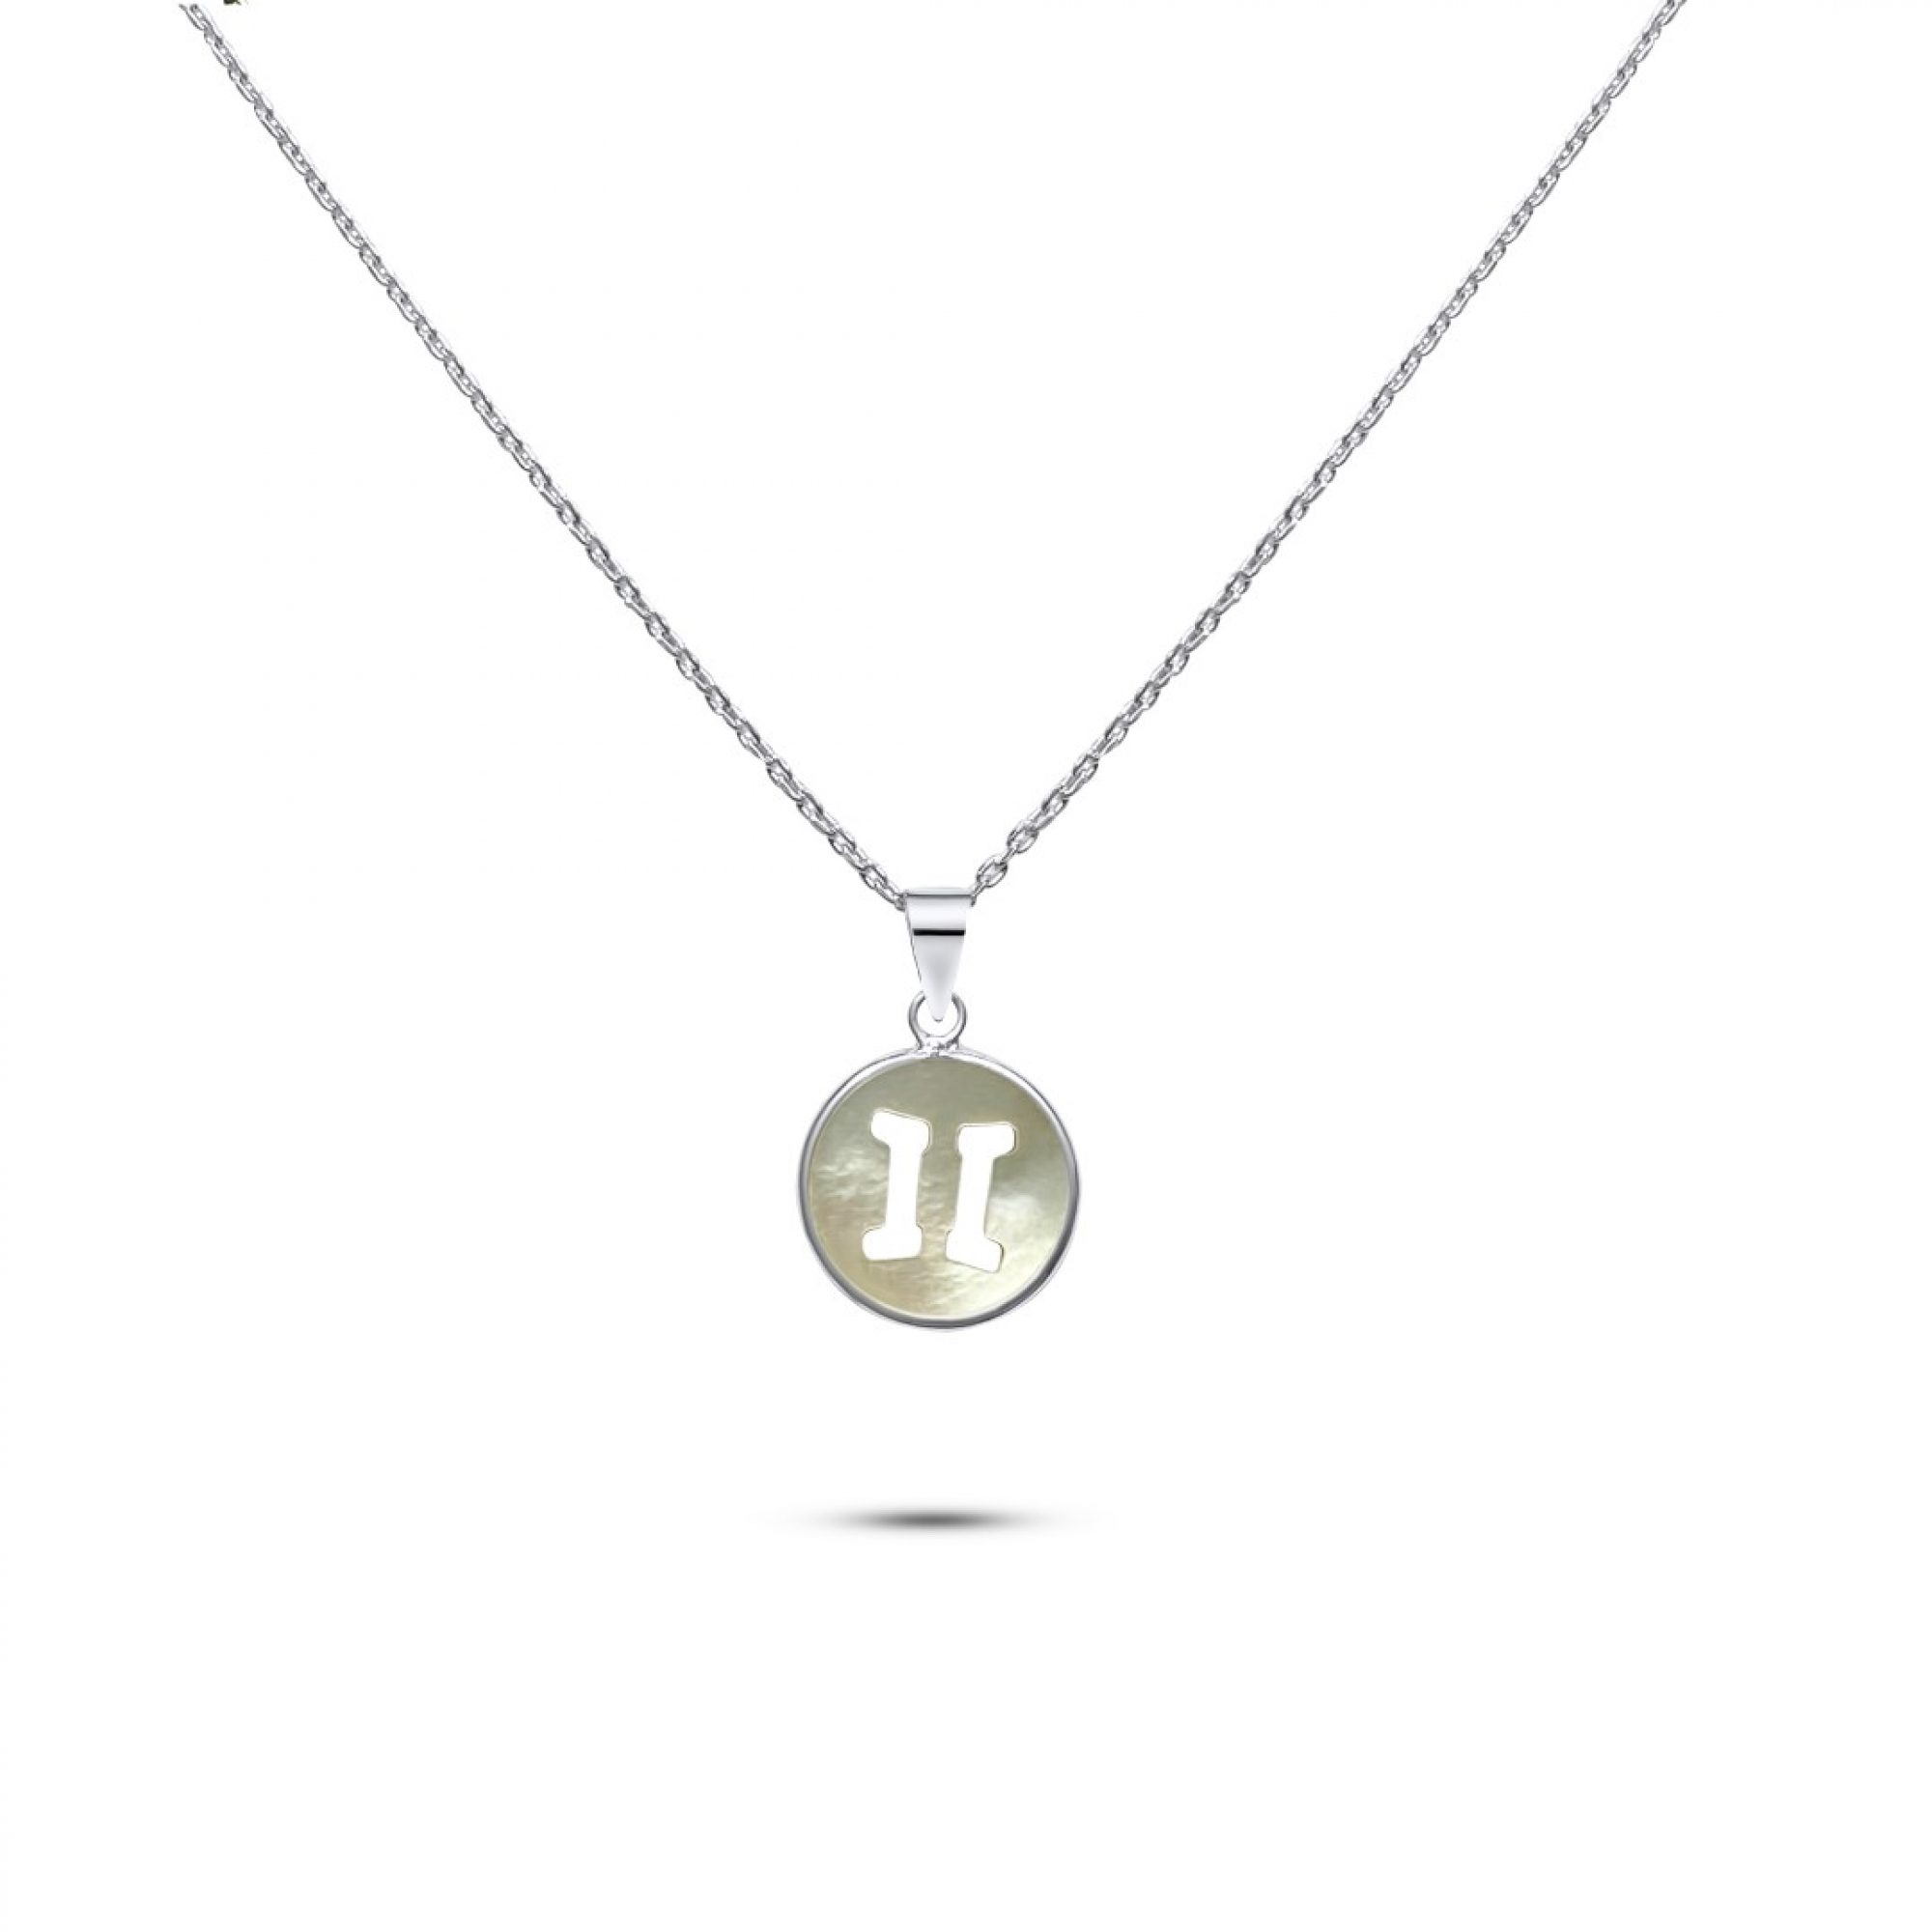 Gemini sign necklace with mother of pearl